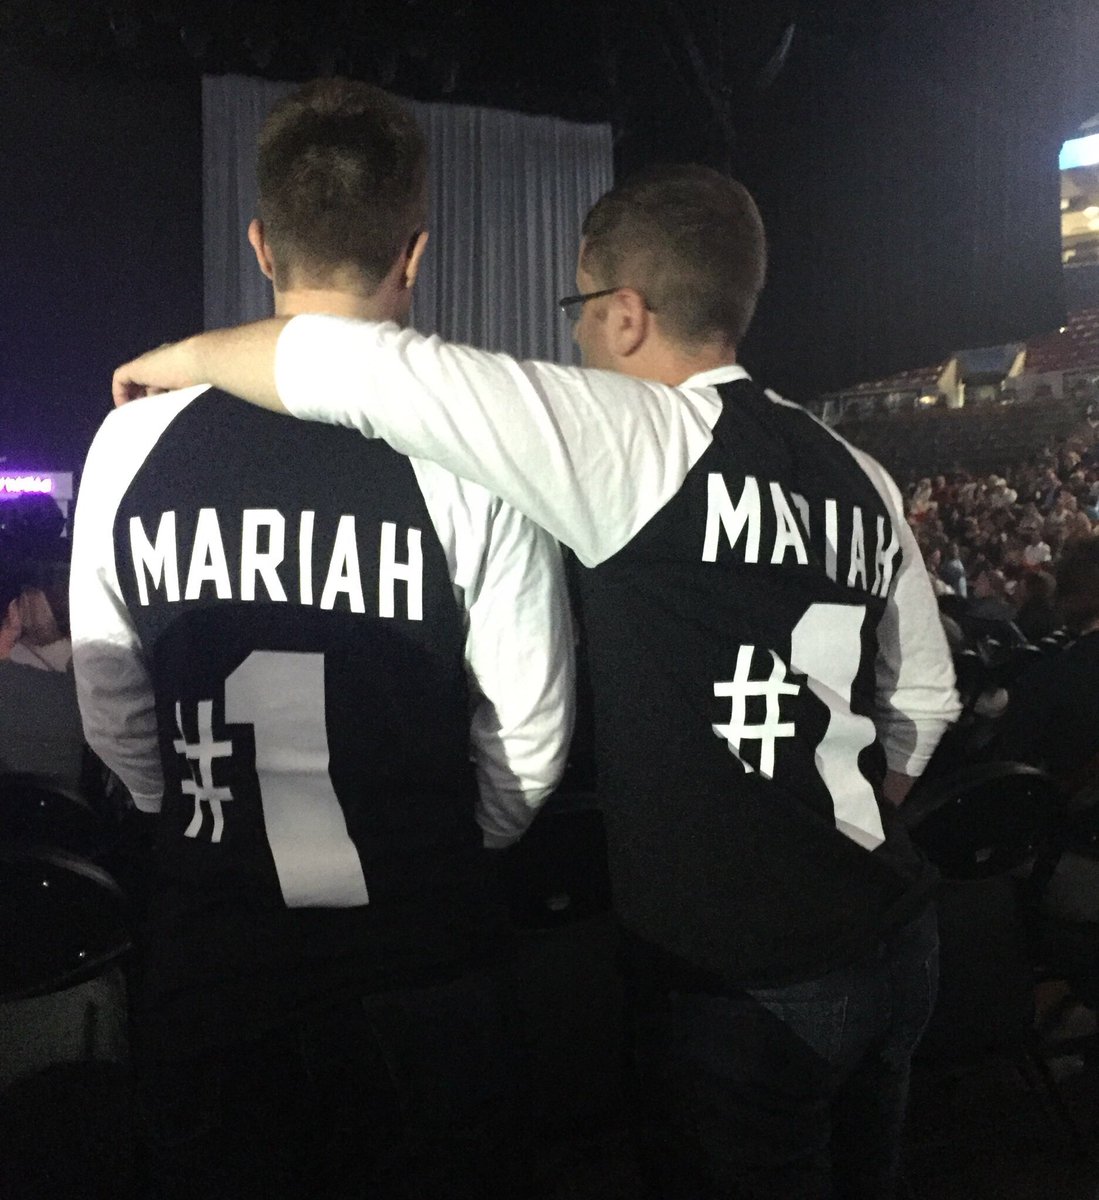 RT @DamnitMaurie: Those who @mariahcarey together stay together! https://t.co/XncjsnsMnZ